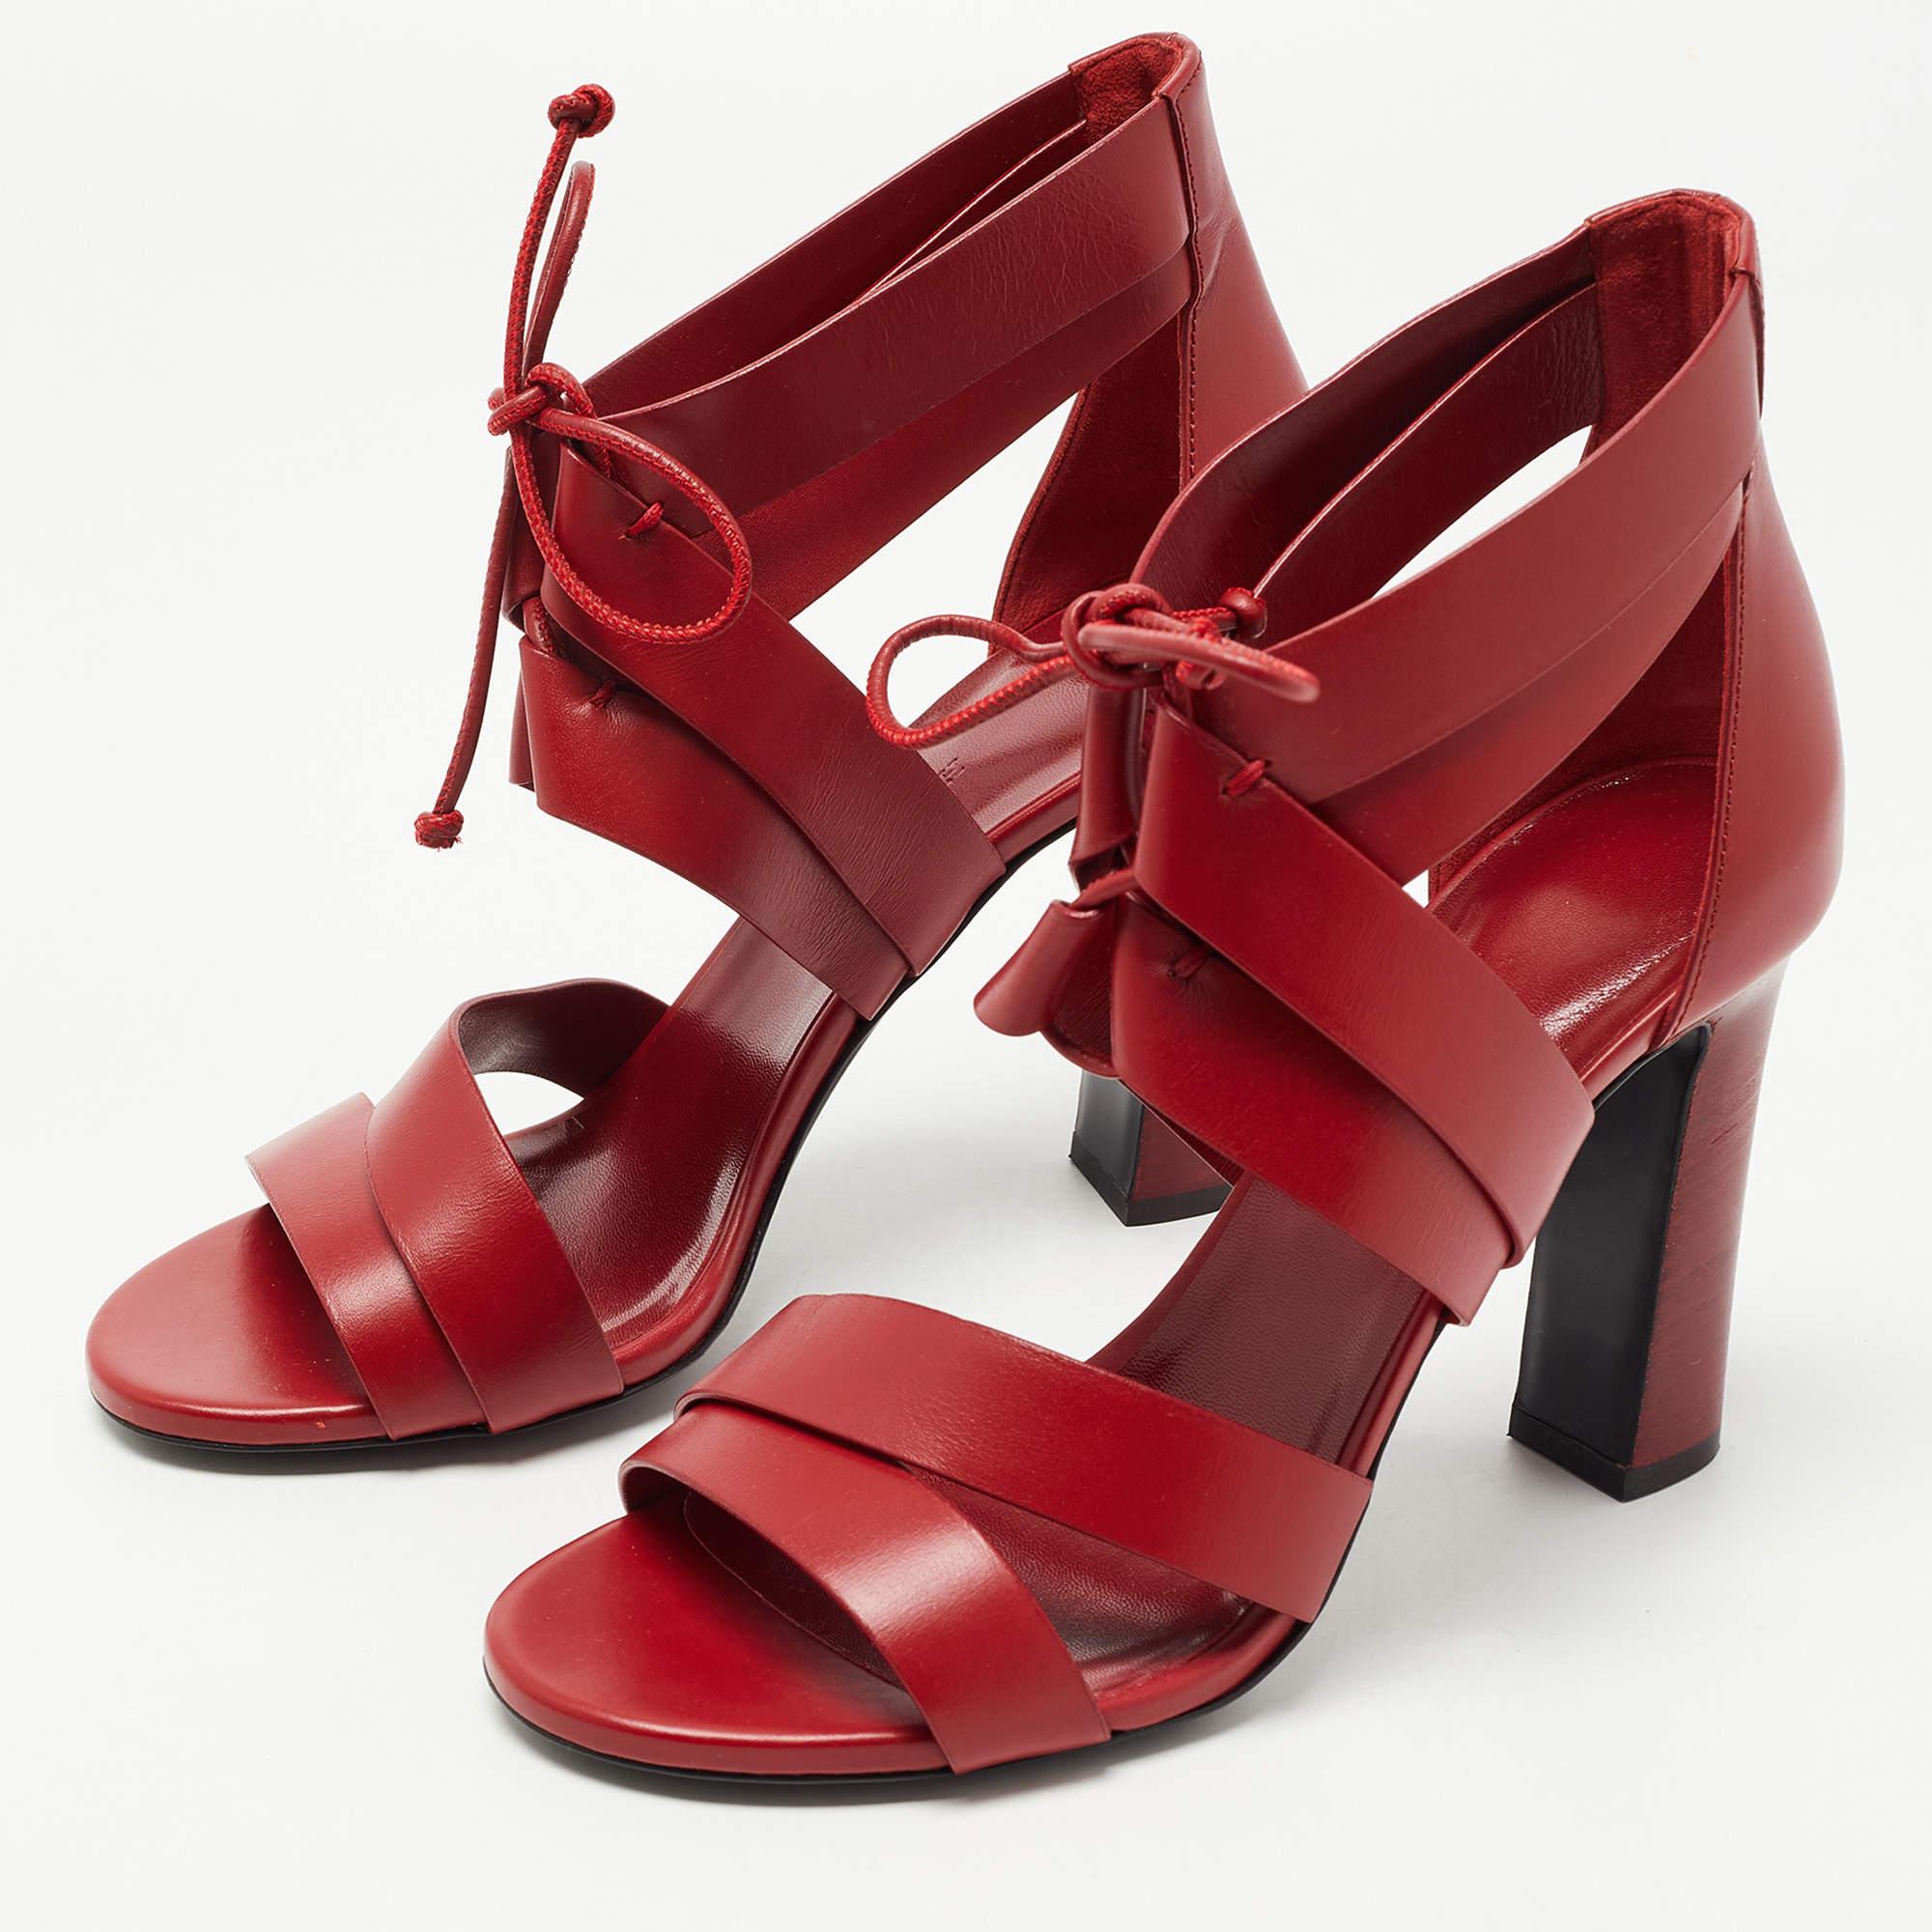 Hermes Red Leather Ankle Strap Sandals Size 38 1